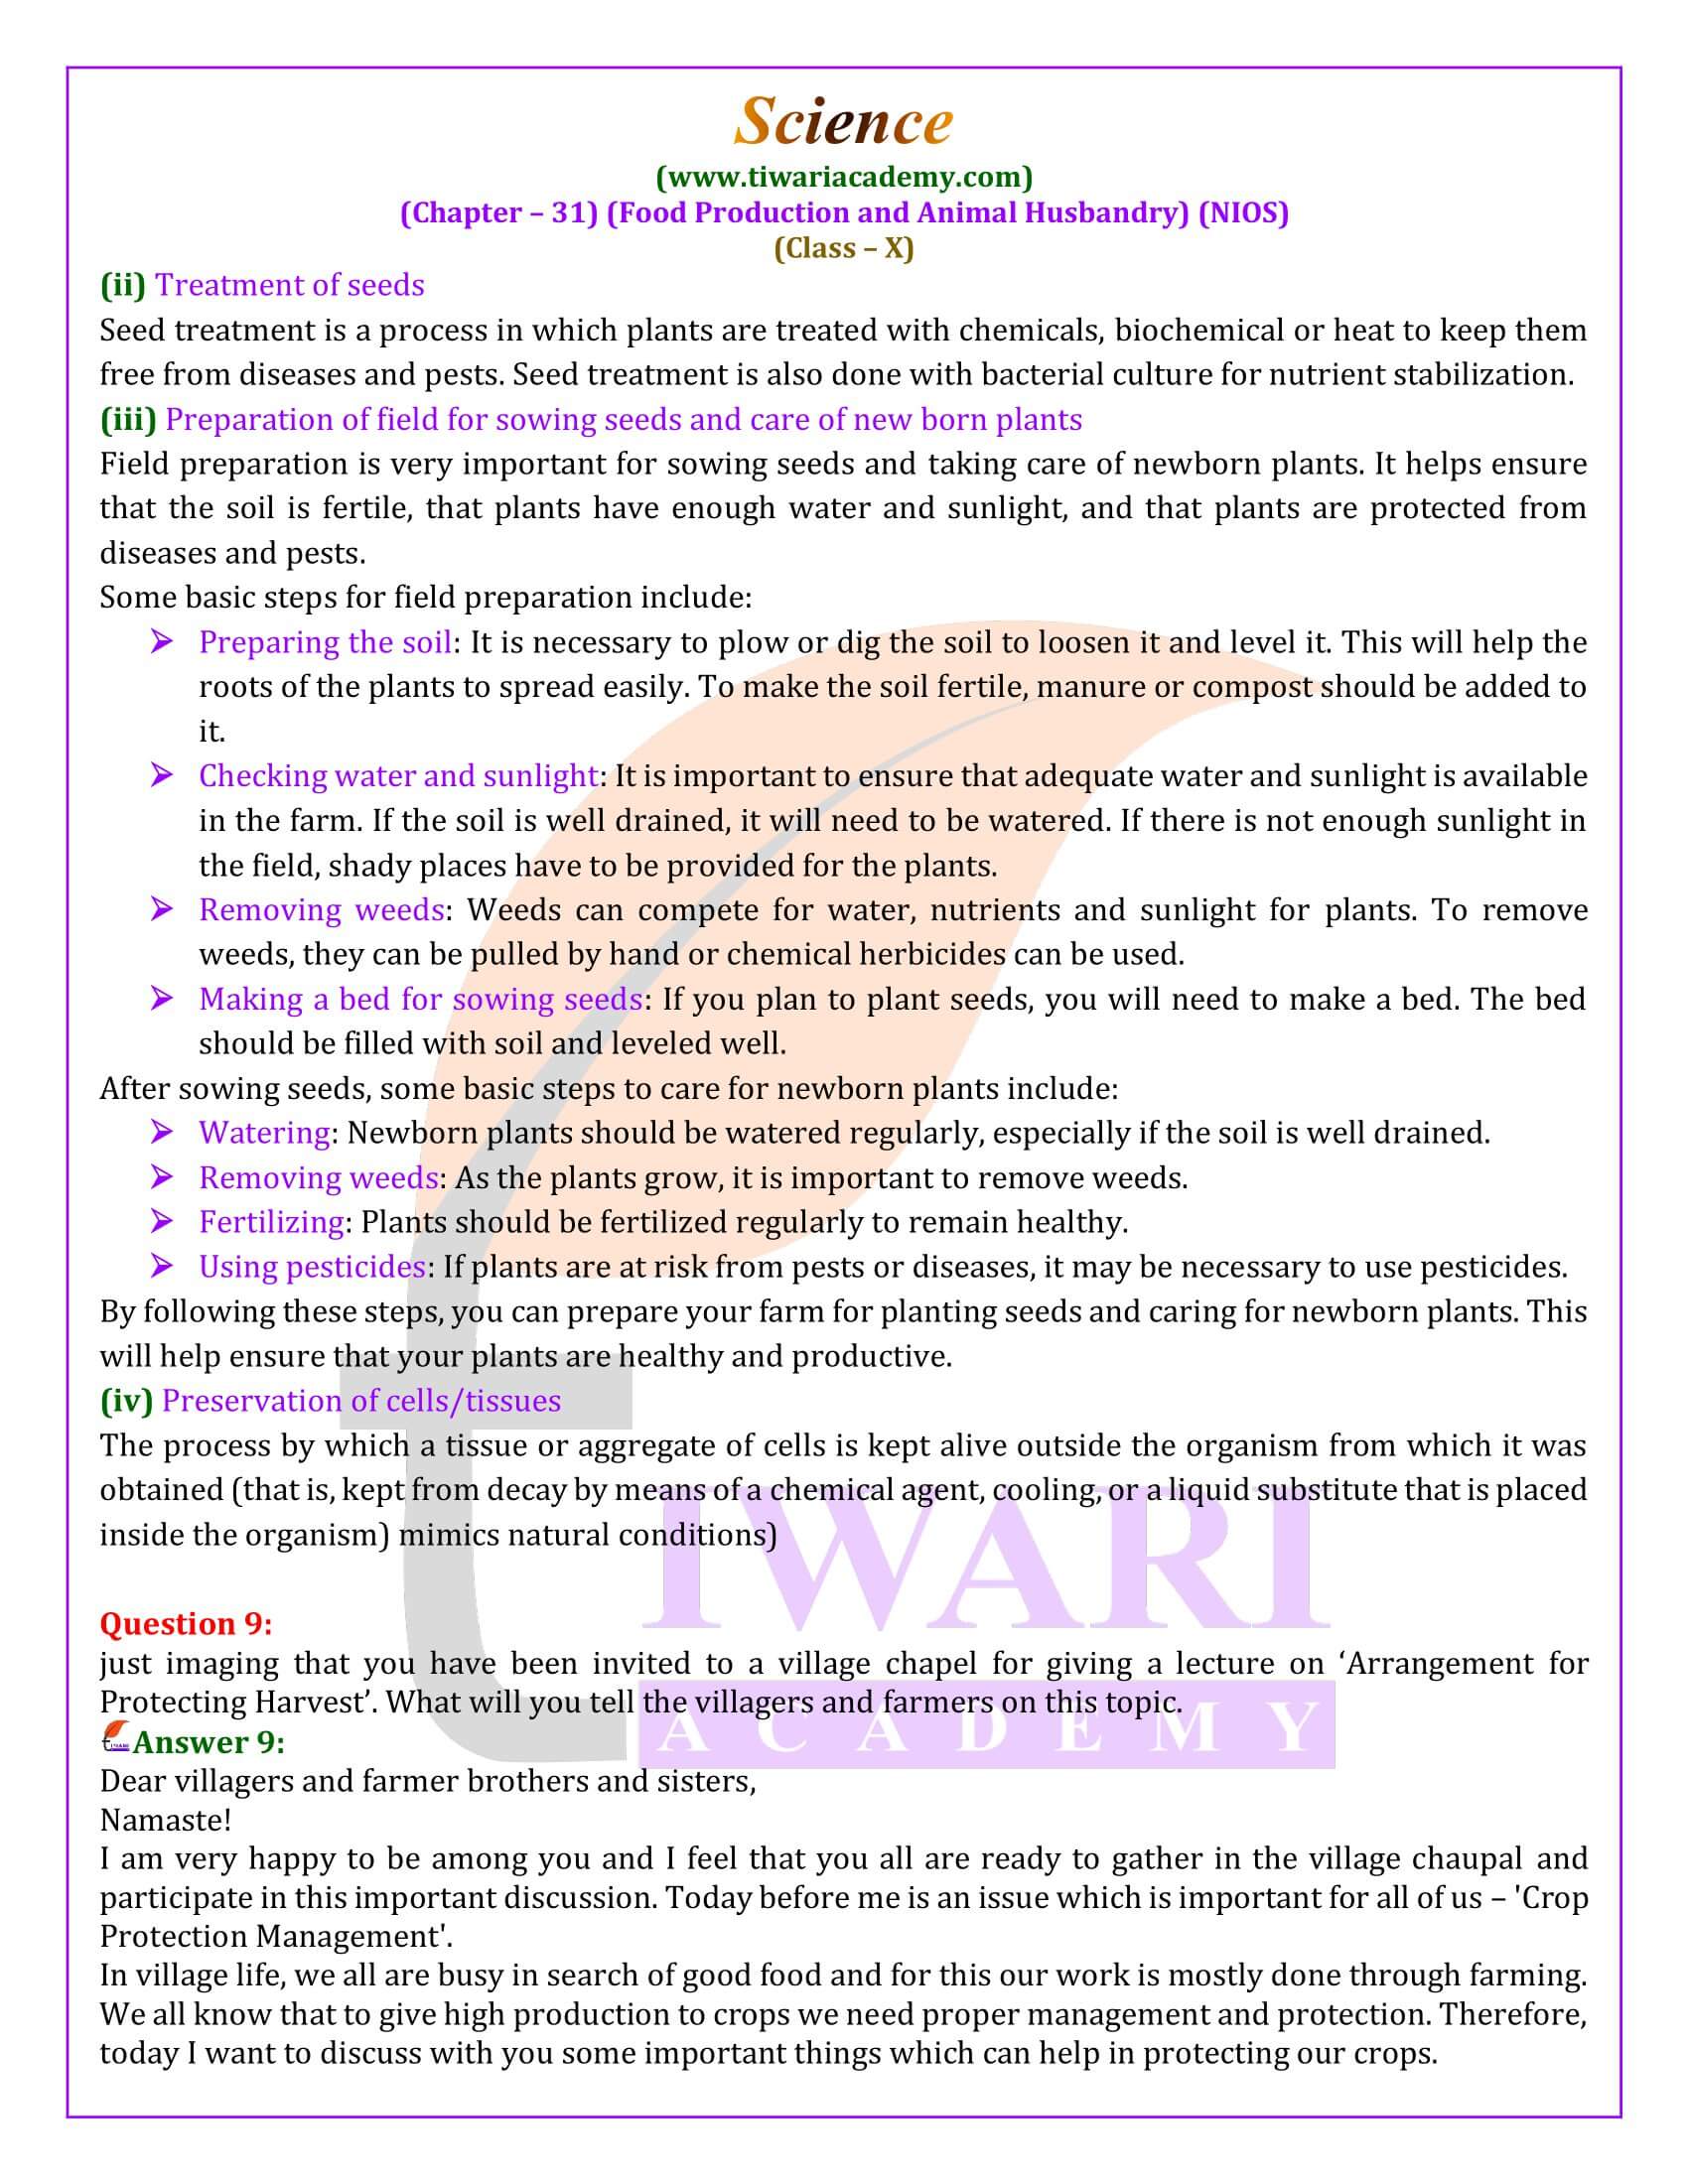 NIOS Class 10 Science Chapter 31 Exercises Answers